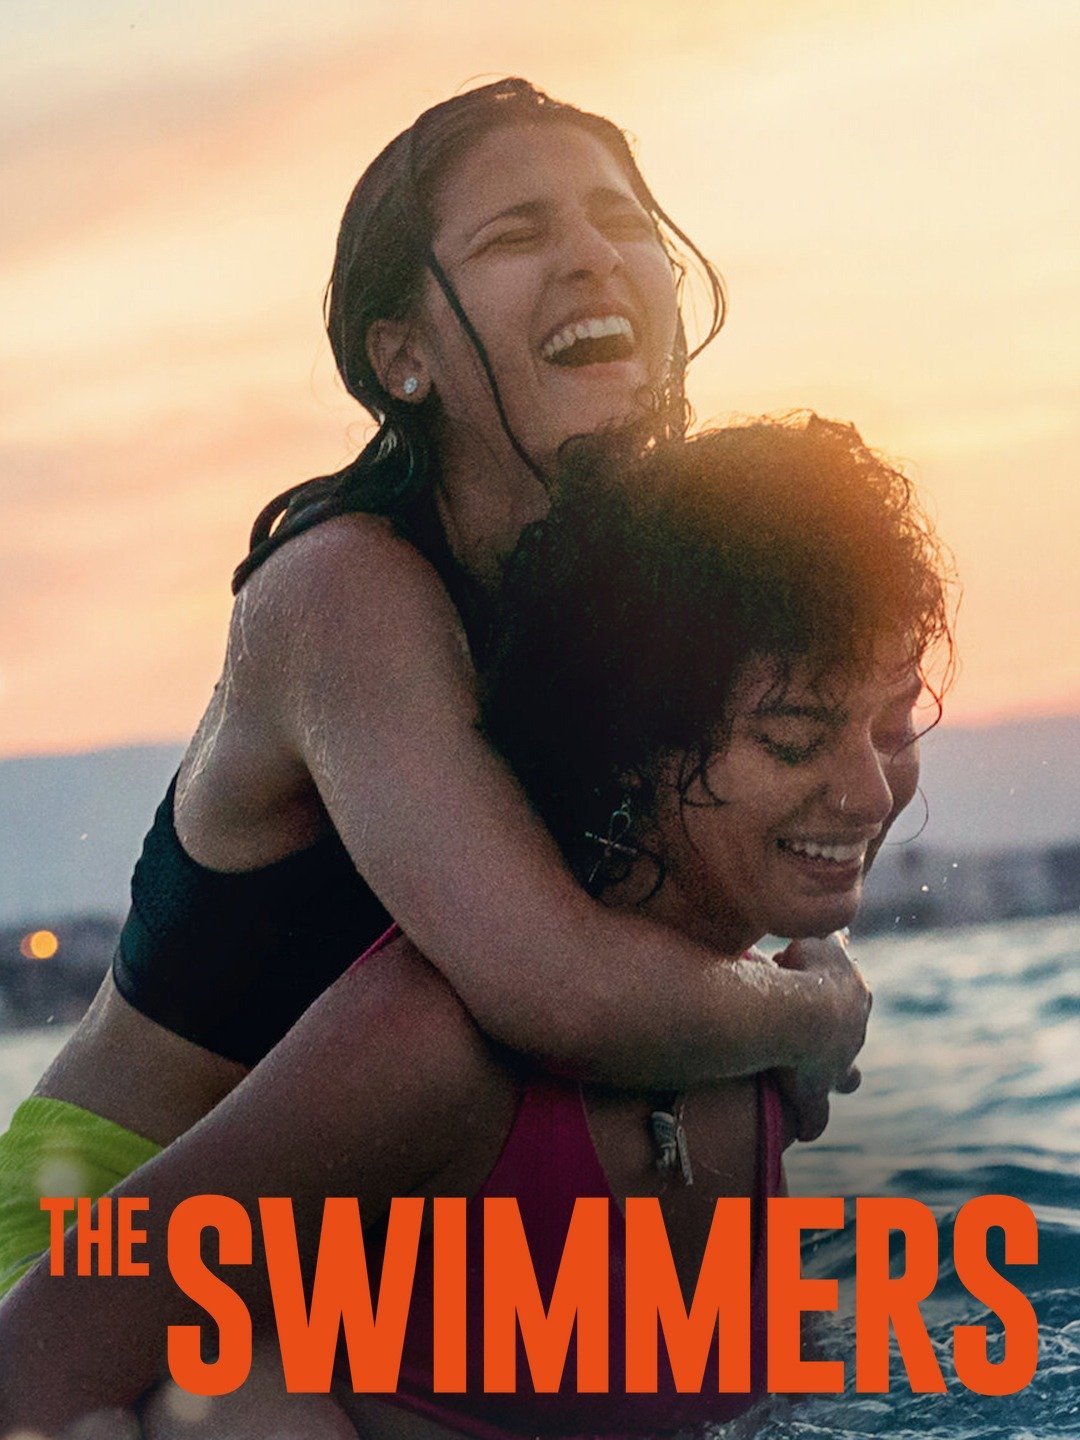 The Swimmers: Teaser Trailer - Trailers & Videos - Rotten Tomatoes